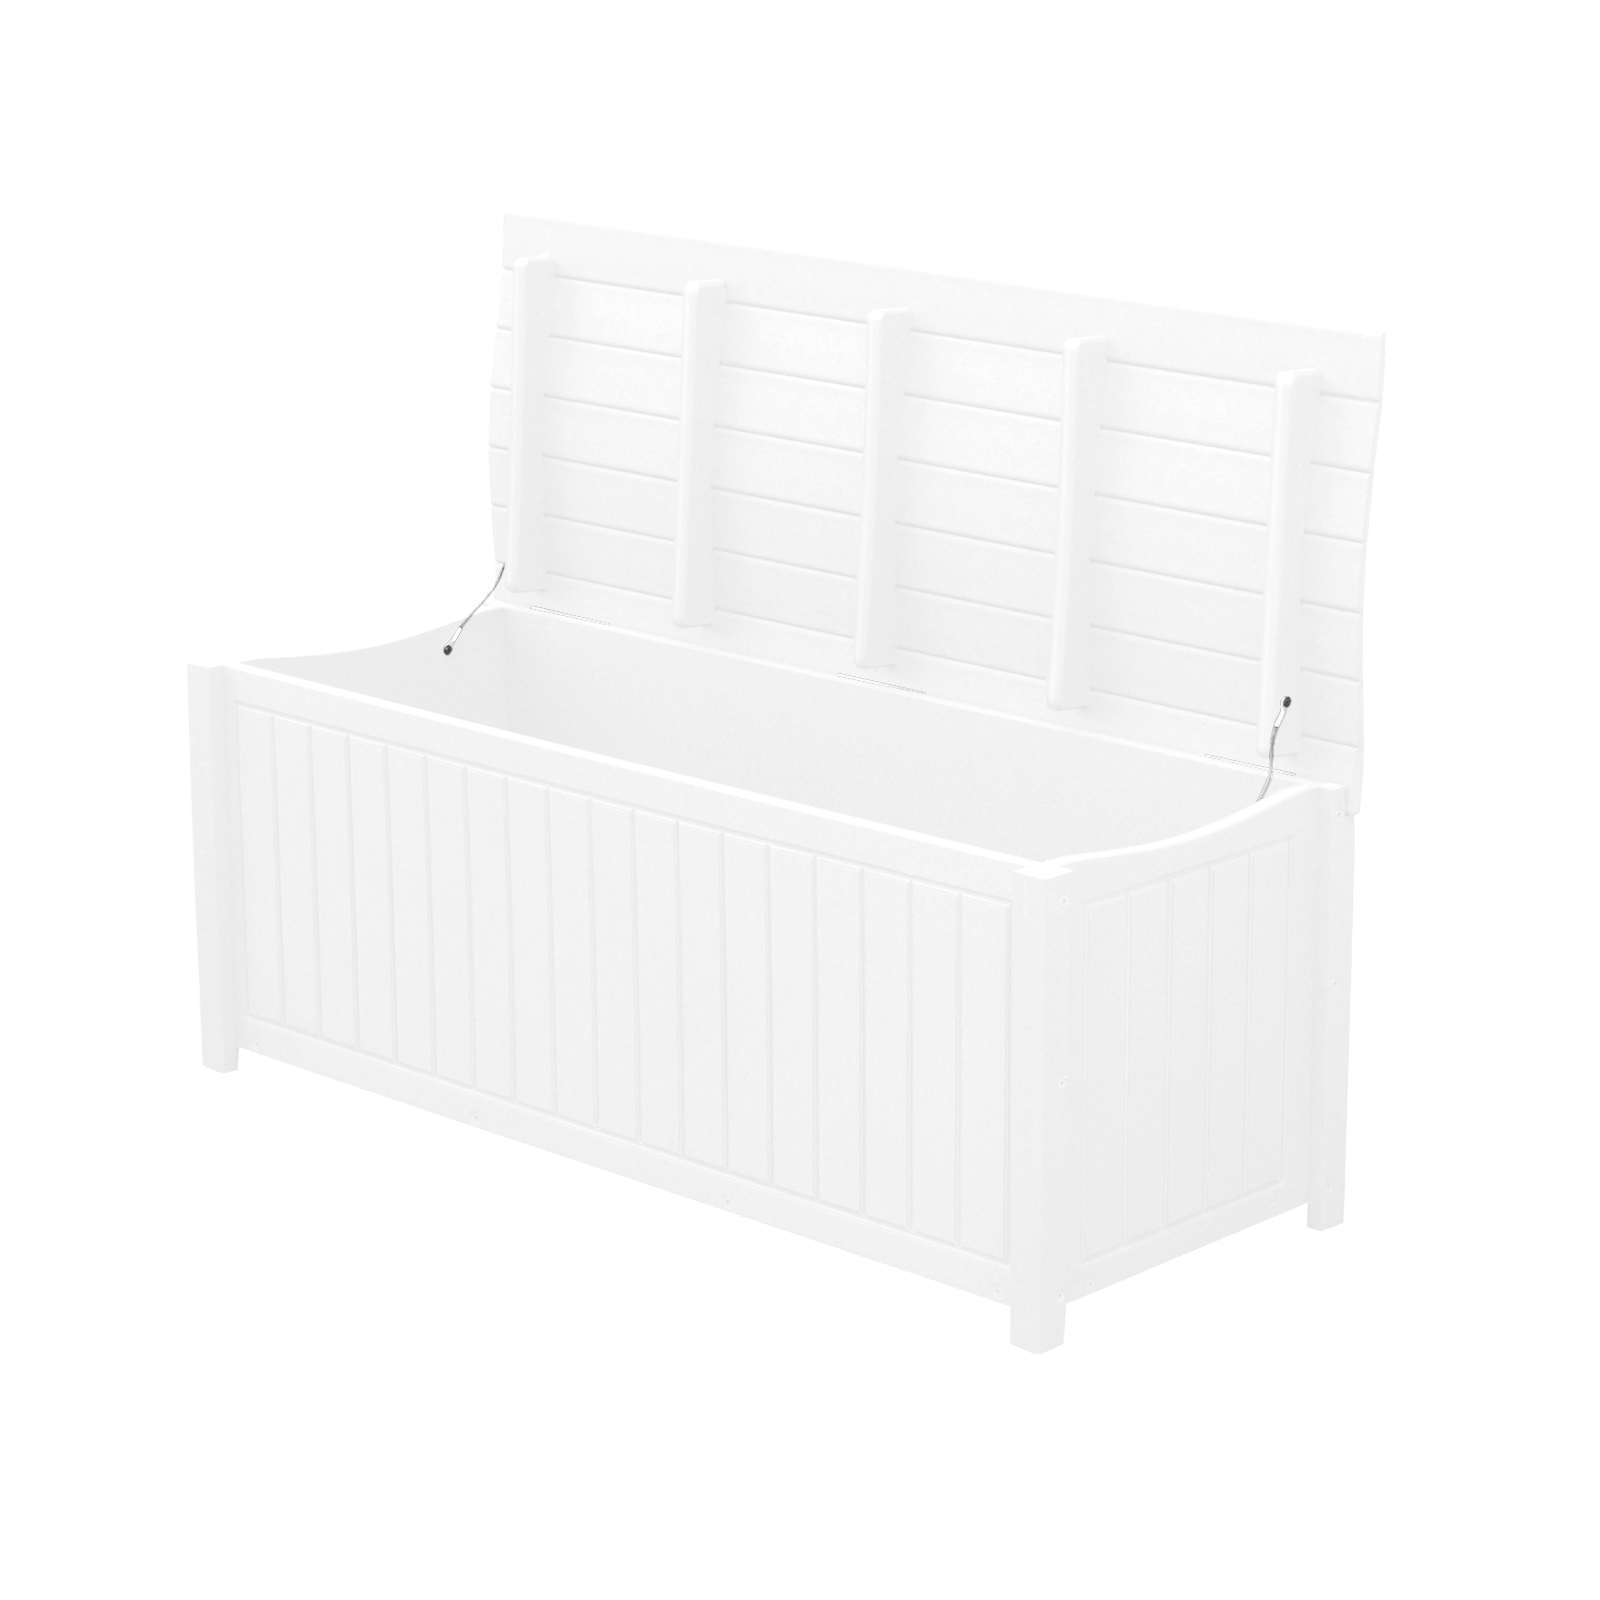 Brisbane Curved Top Commercial Grade Deck Box, White